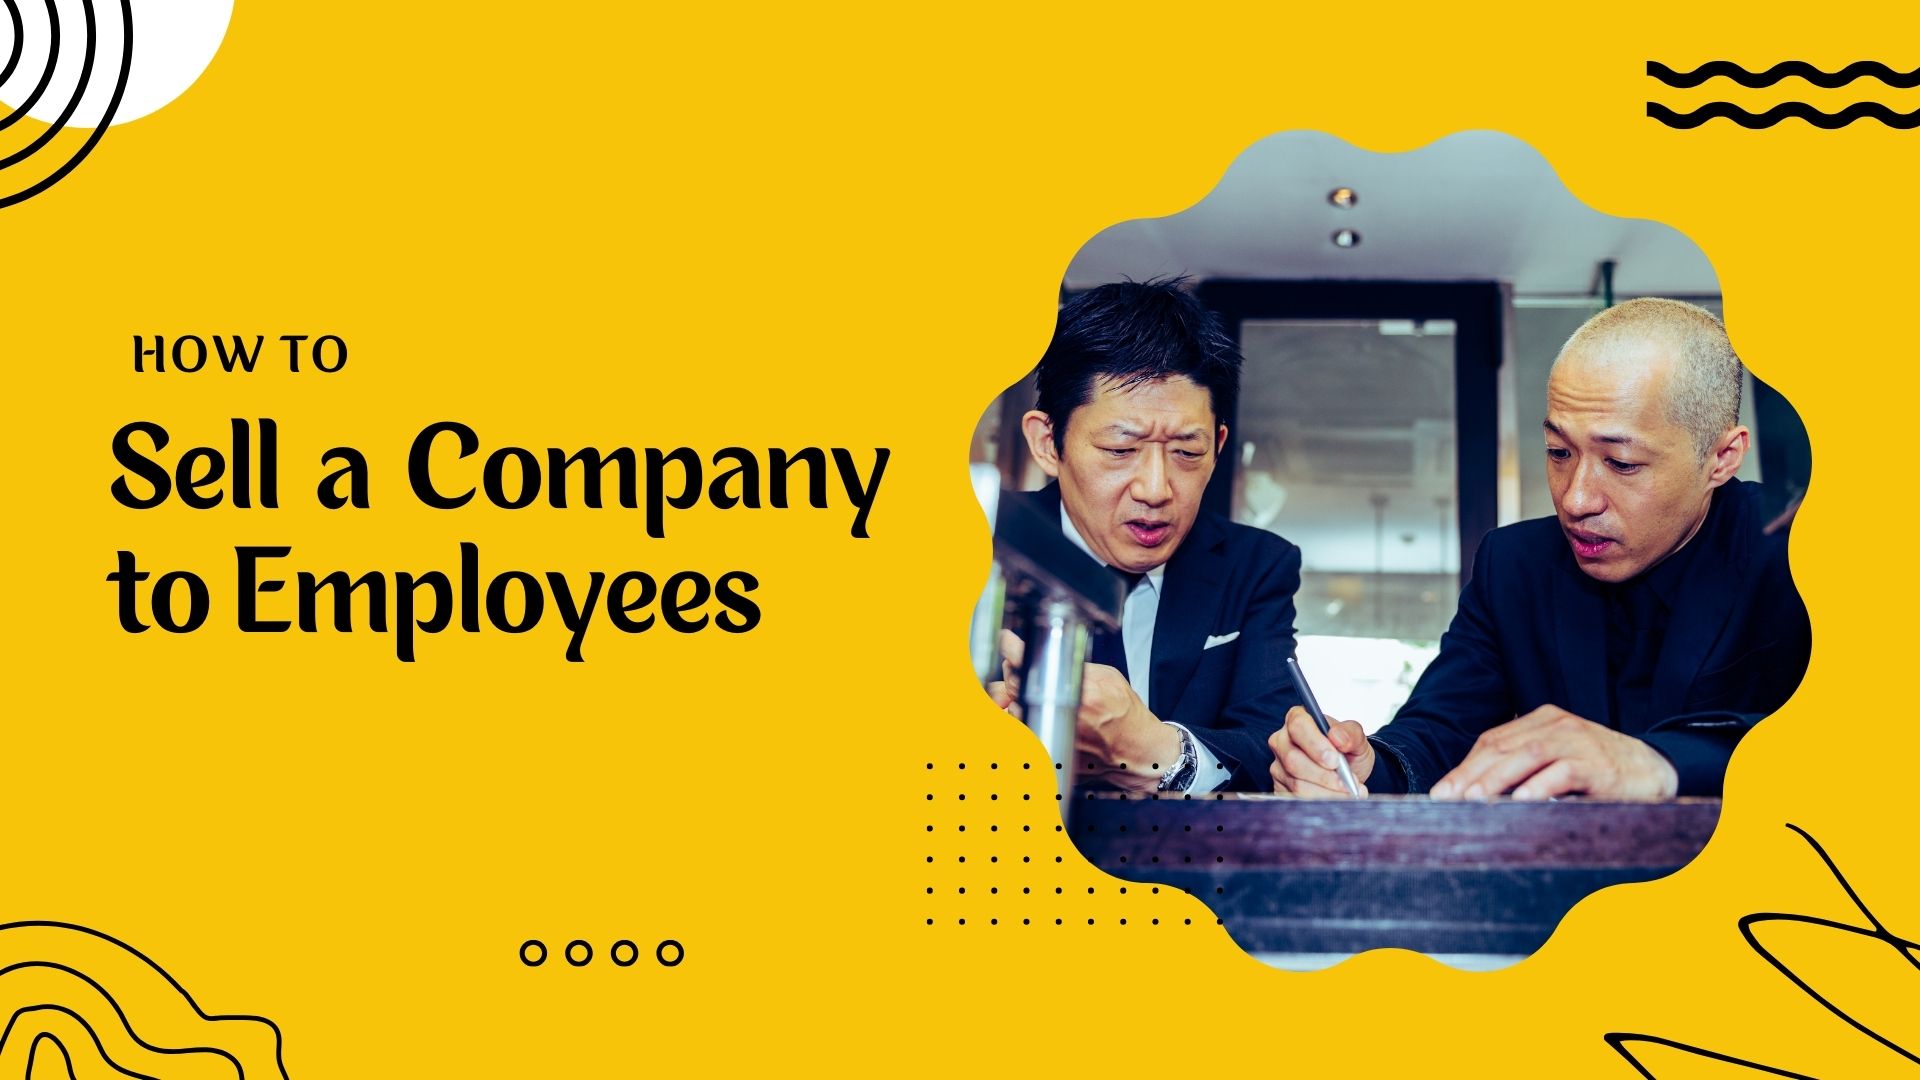 How to Sell a Company to Employees